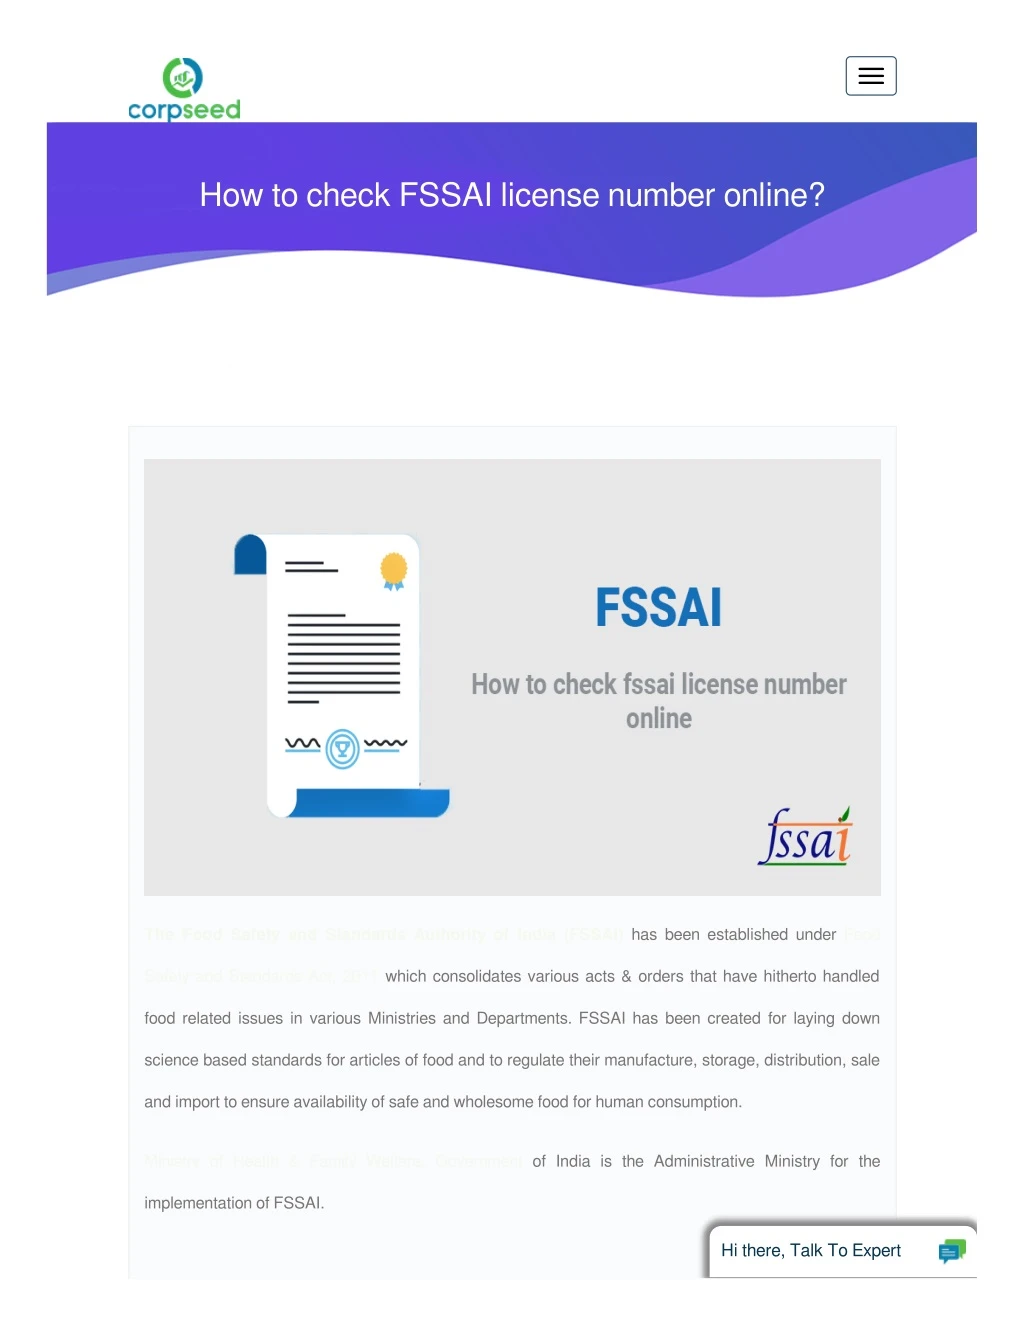 how to check fssai license number online